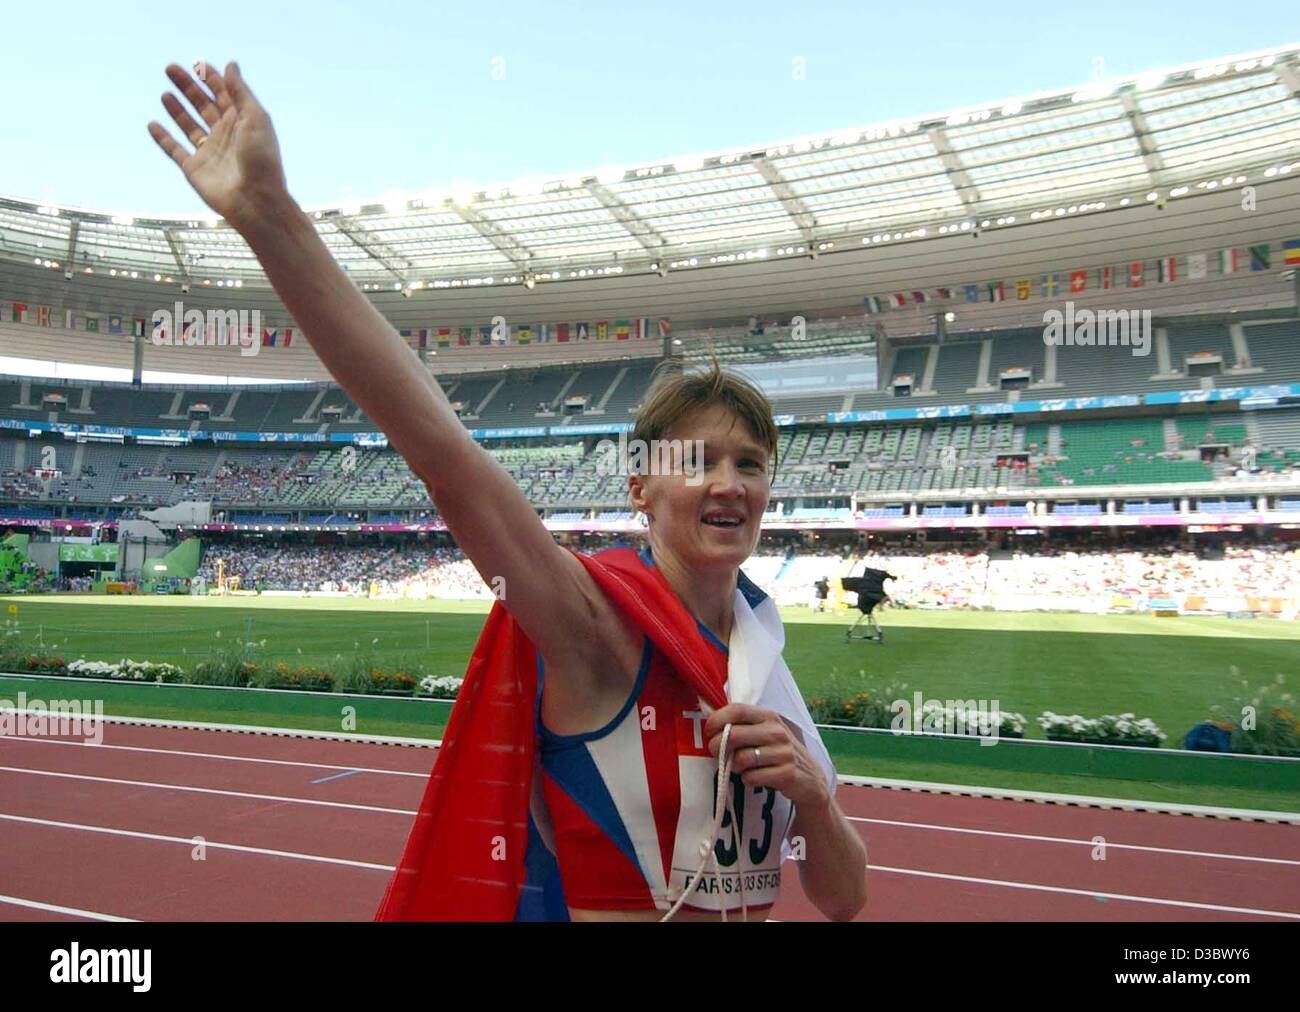 (dpa) - Russian walker Yelena Nikolayeva carries the Russian flag and waves after her victory in the women's 20 km walk event at the 9th IAAF Athletic World Championships at the Stade de France in Paris, 24 August 2003. Stock Photo